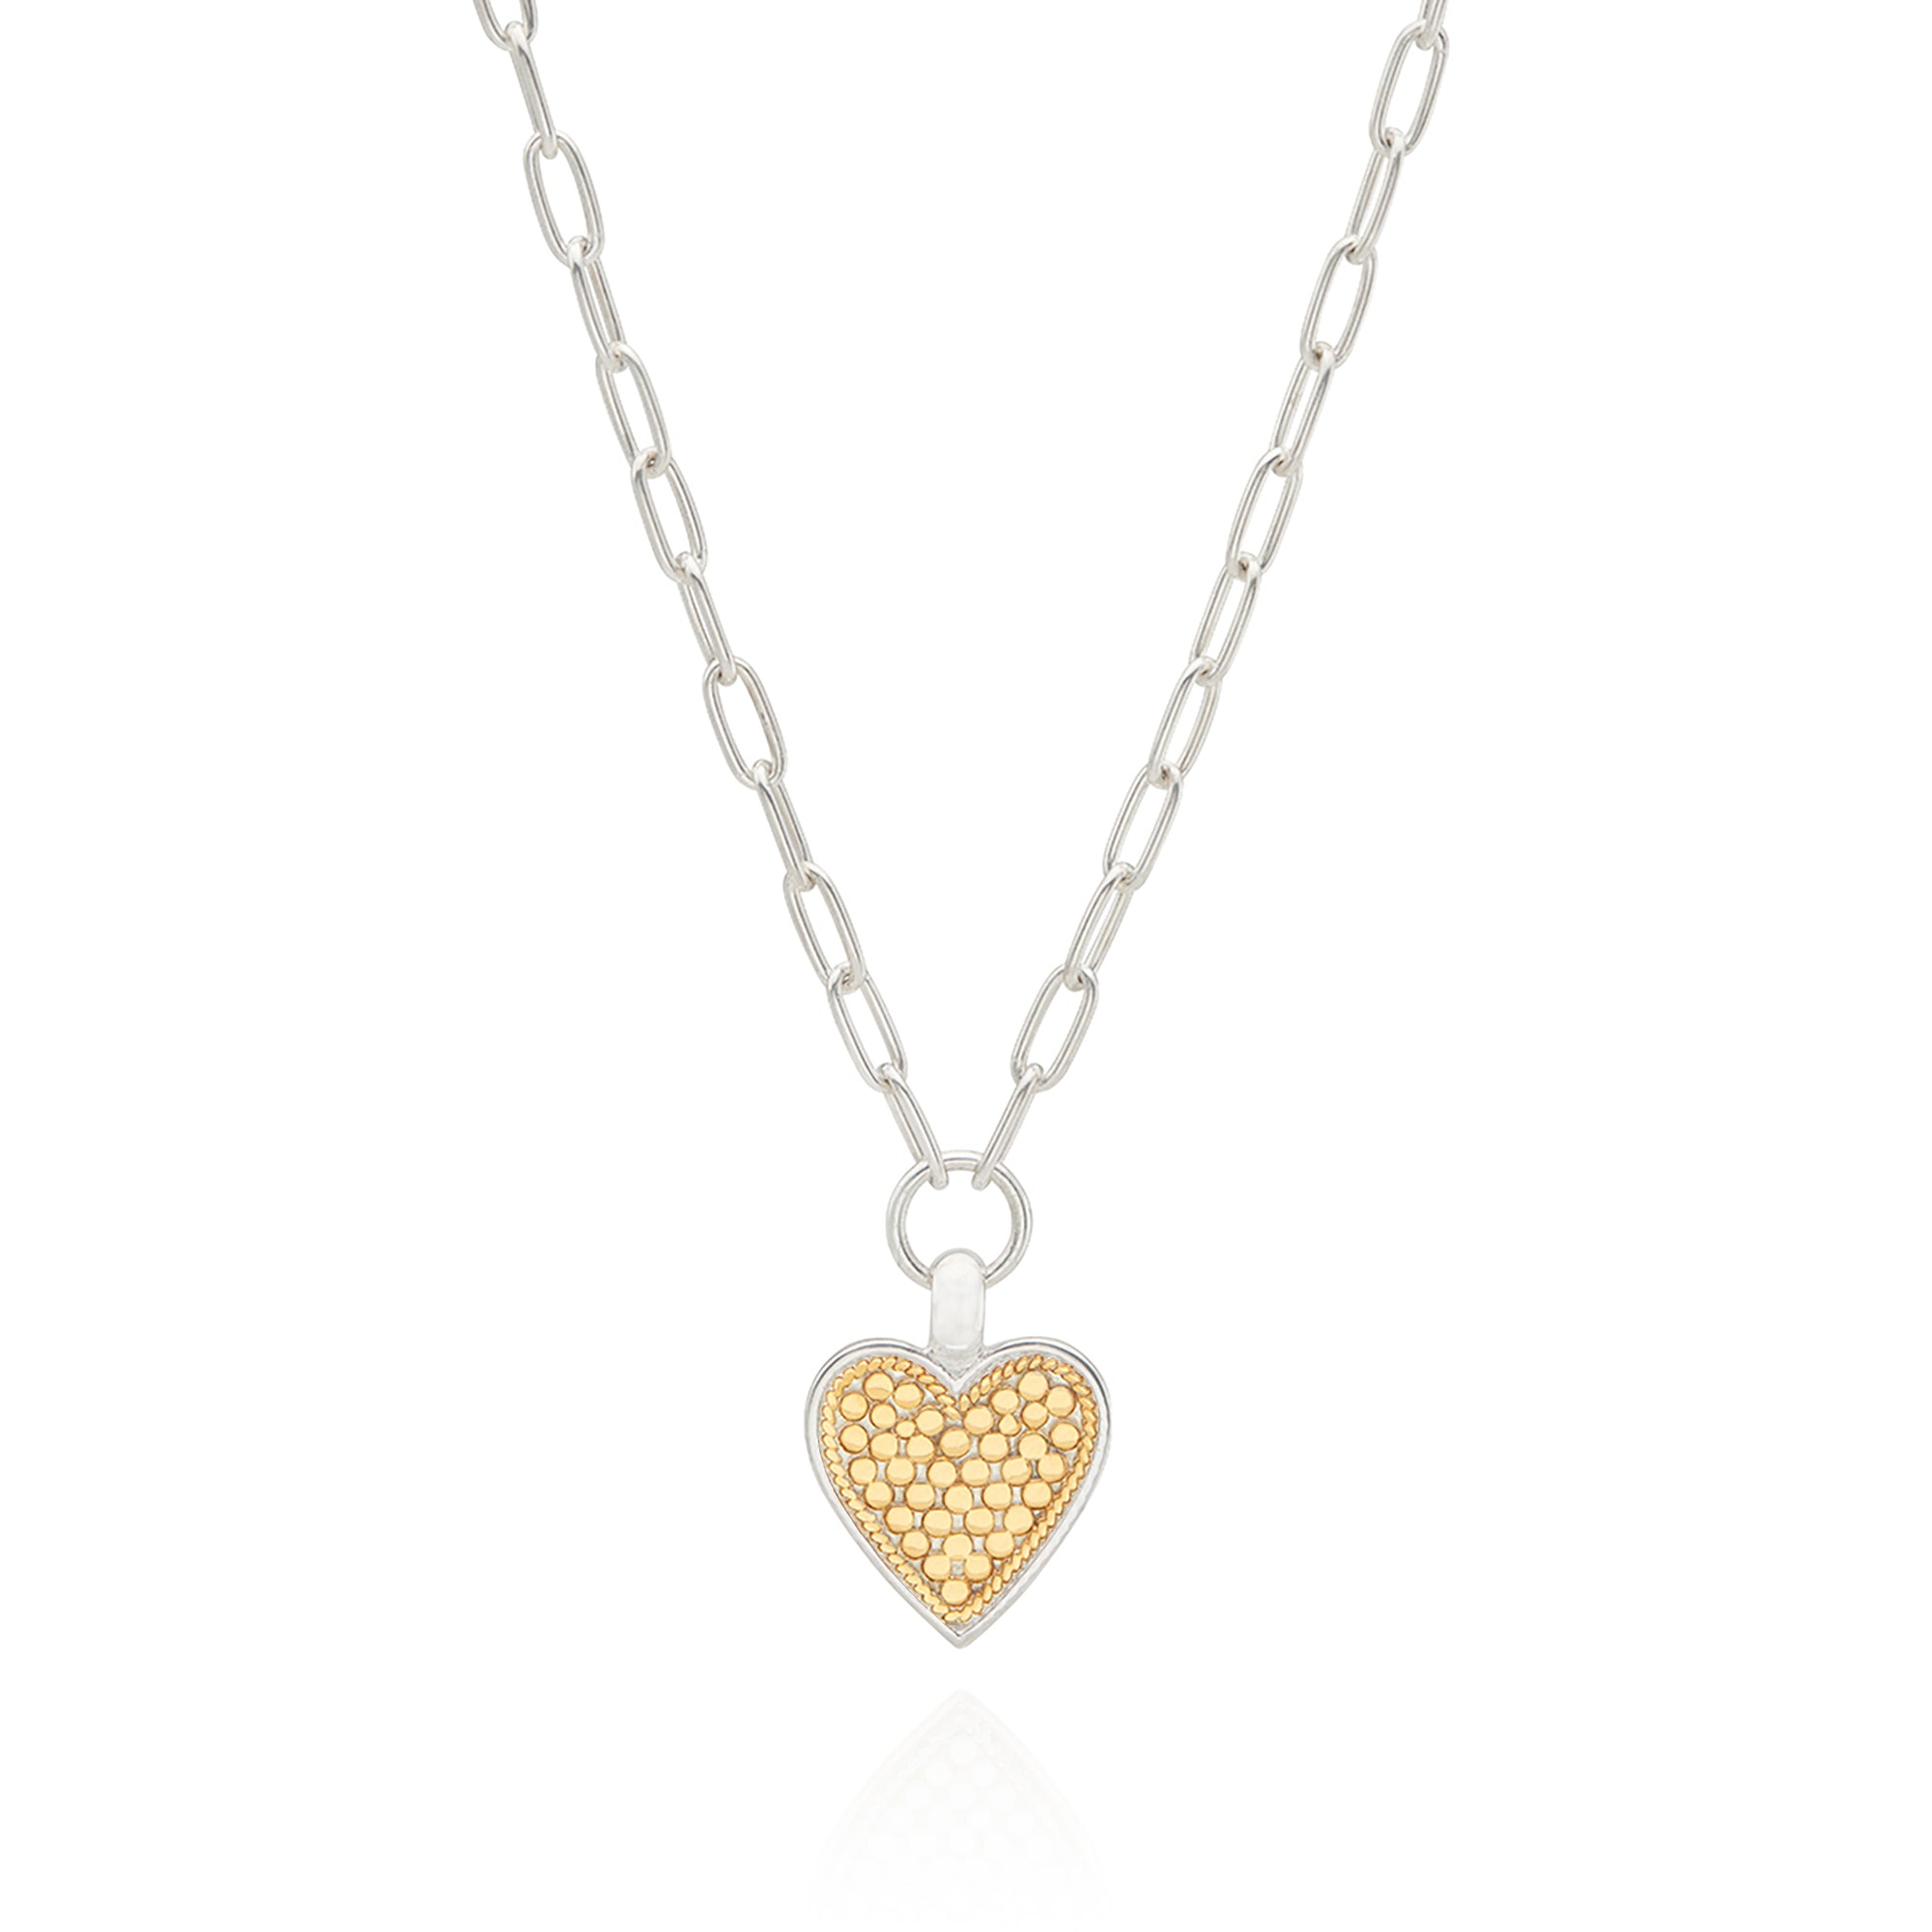 Anna Beck Medium heart necklace silver chain with silver and gold heart charm